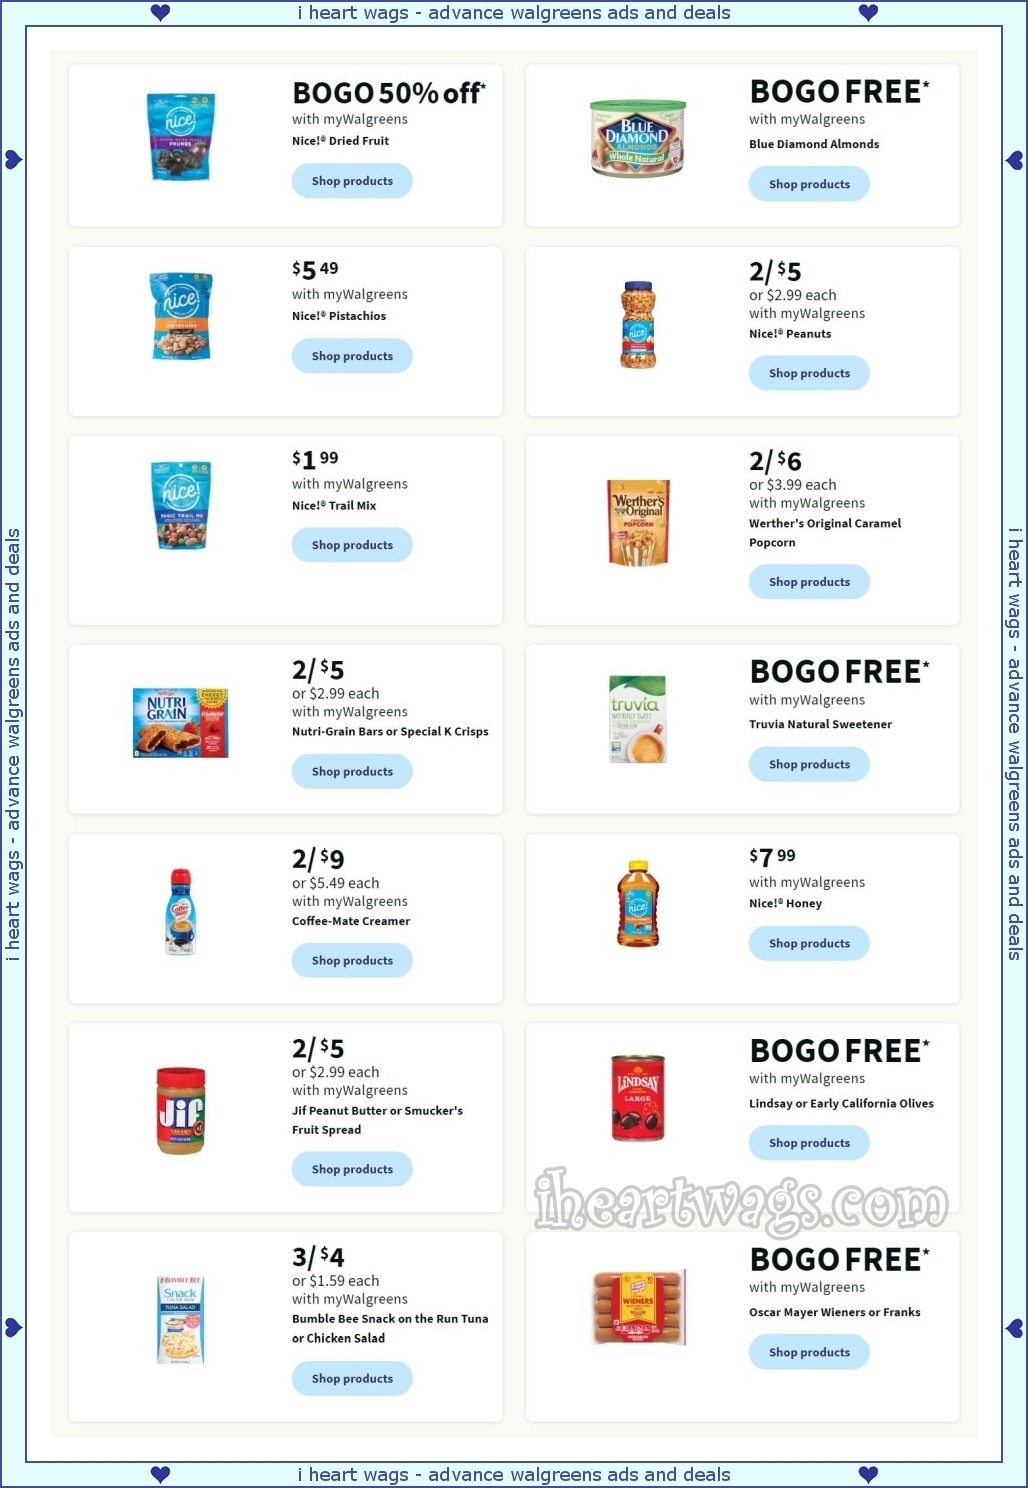  Get $20 Credit w/ $80+ P&G Products Purchase